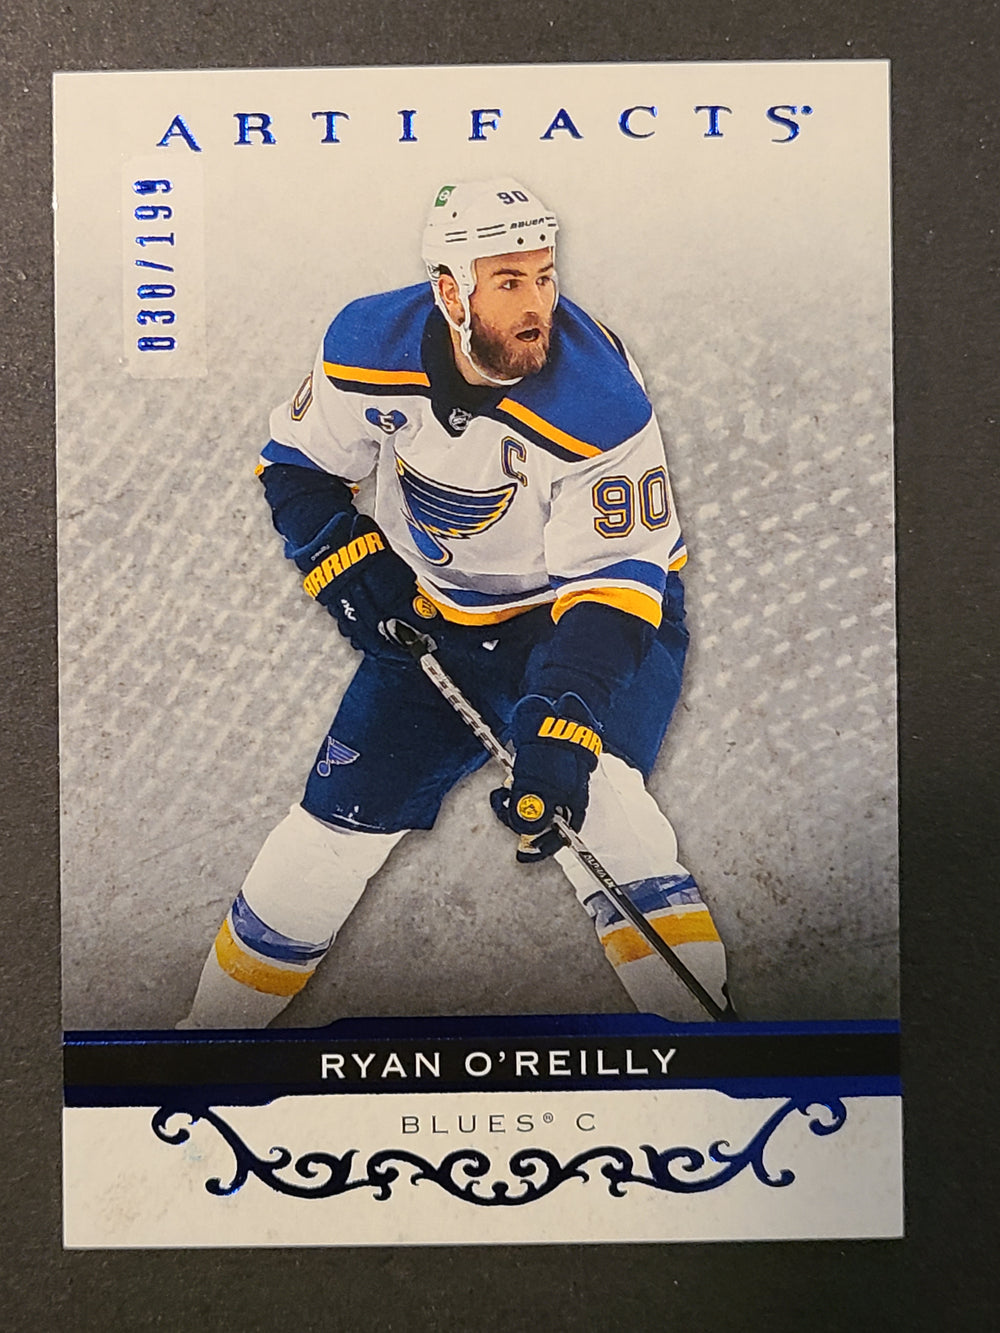 2021-22 Artifacts Royal Blue Parallel #142 Ryan O'Reilly St. Louis Blues 30/199